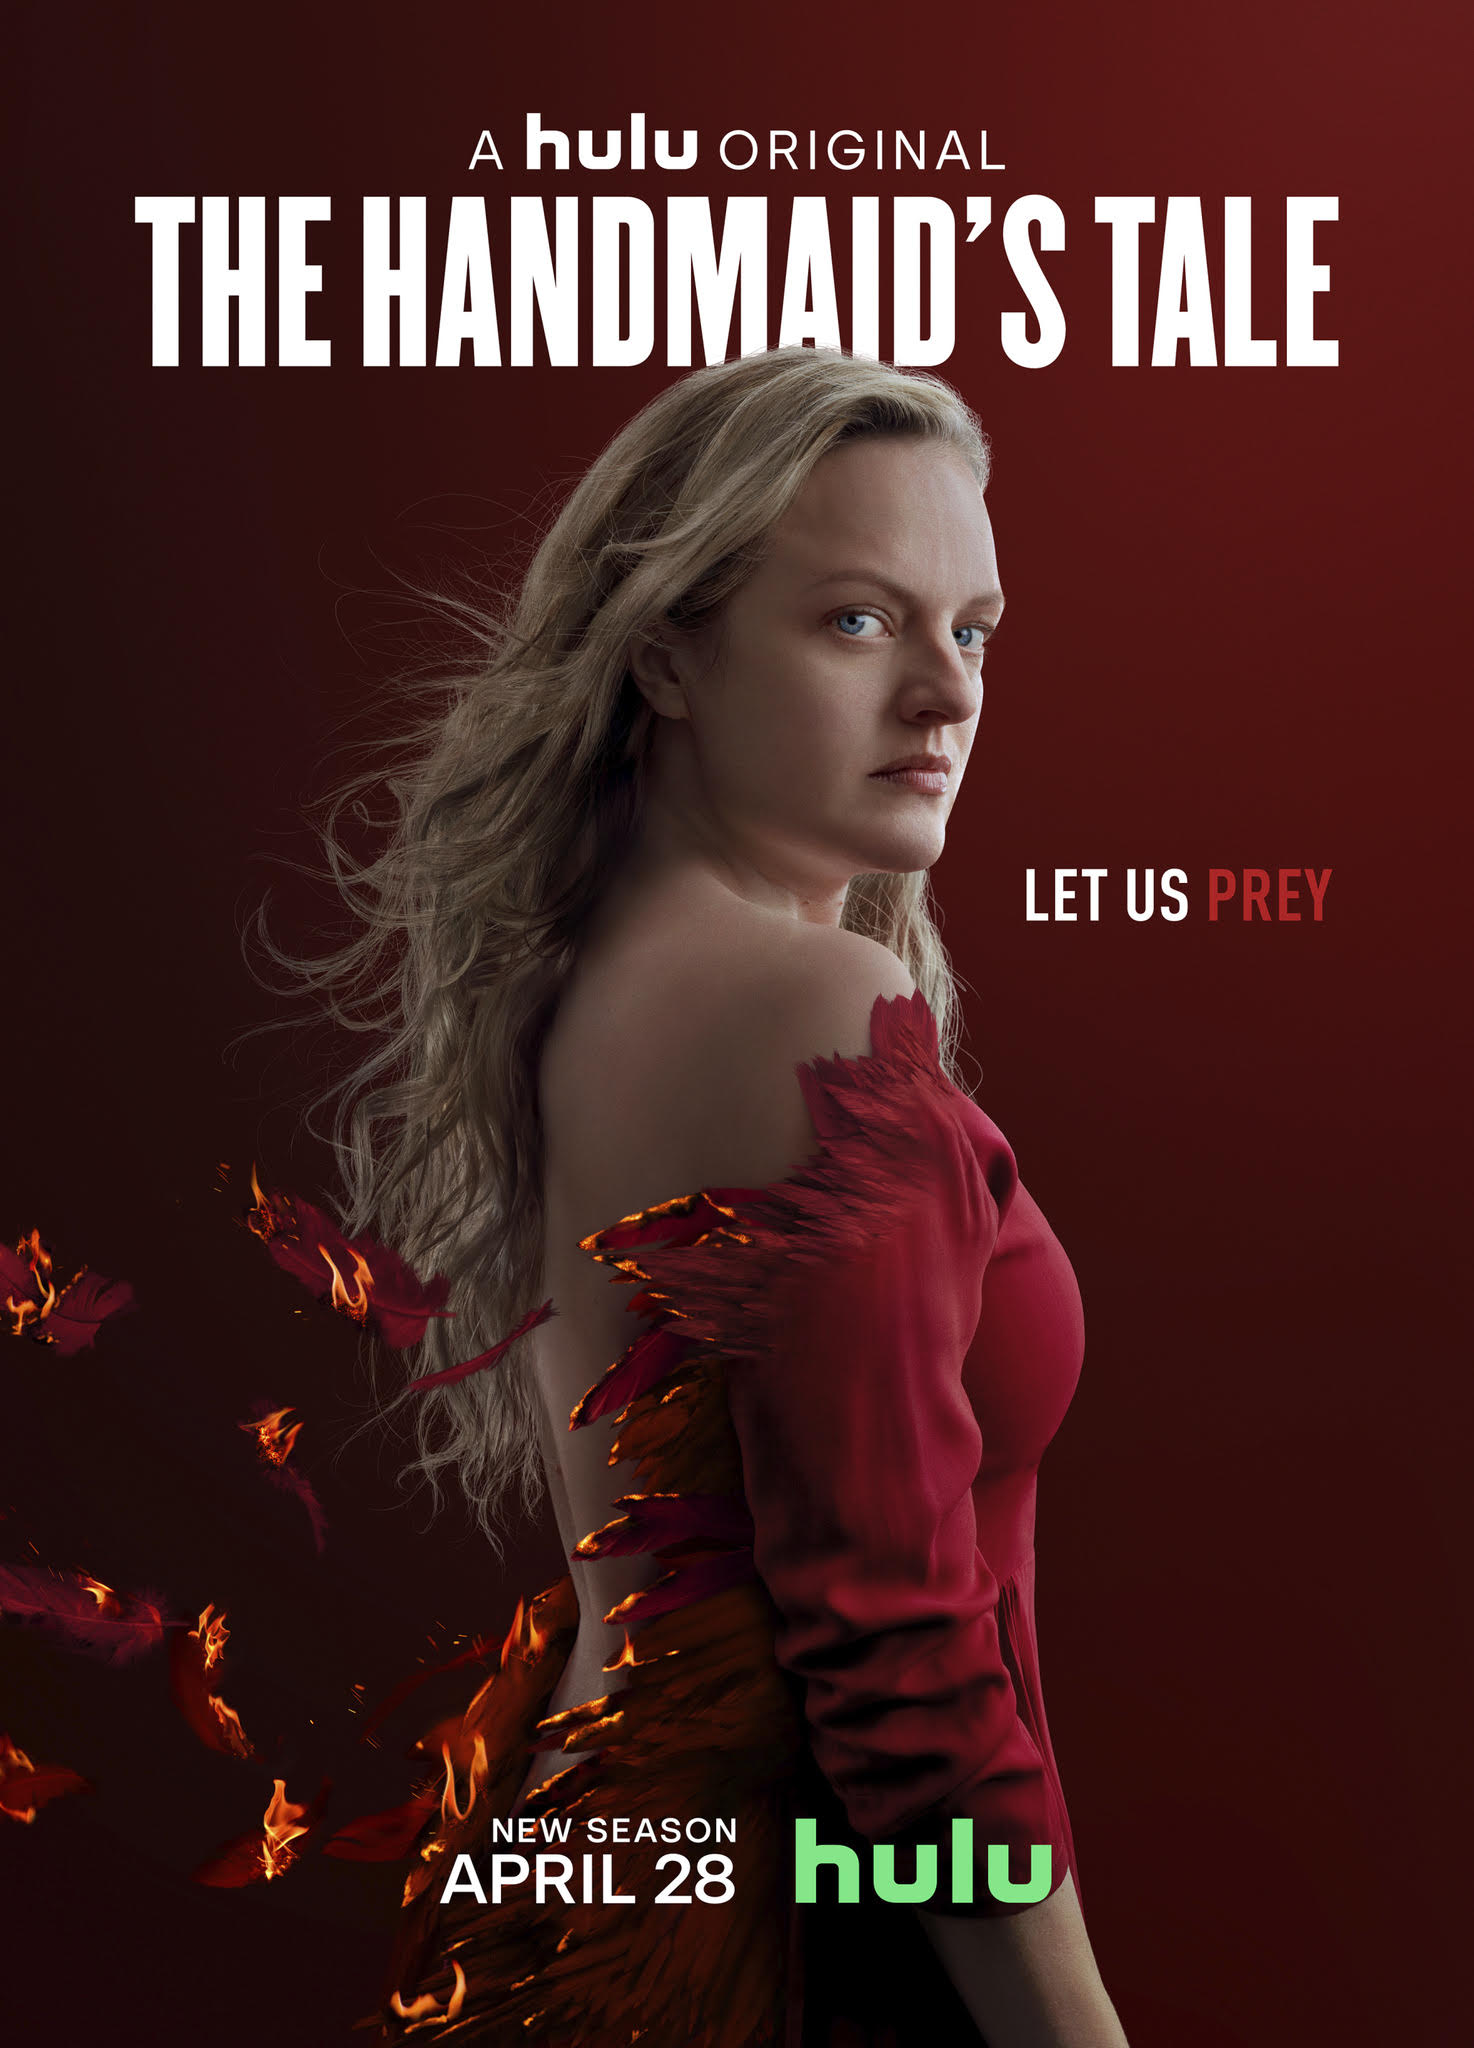 [News] THE HANDMAID'S TALE - Let Us Prey in Latest Trailer